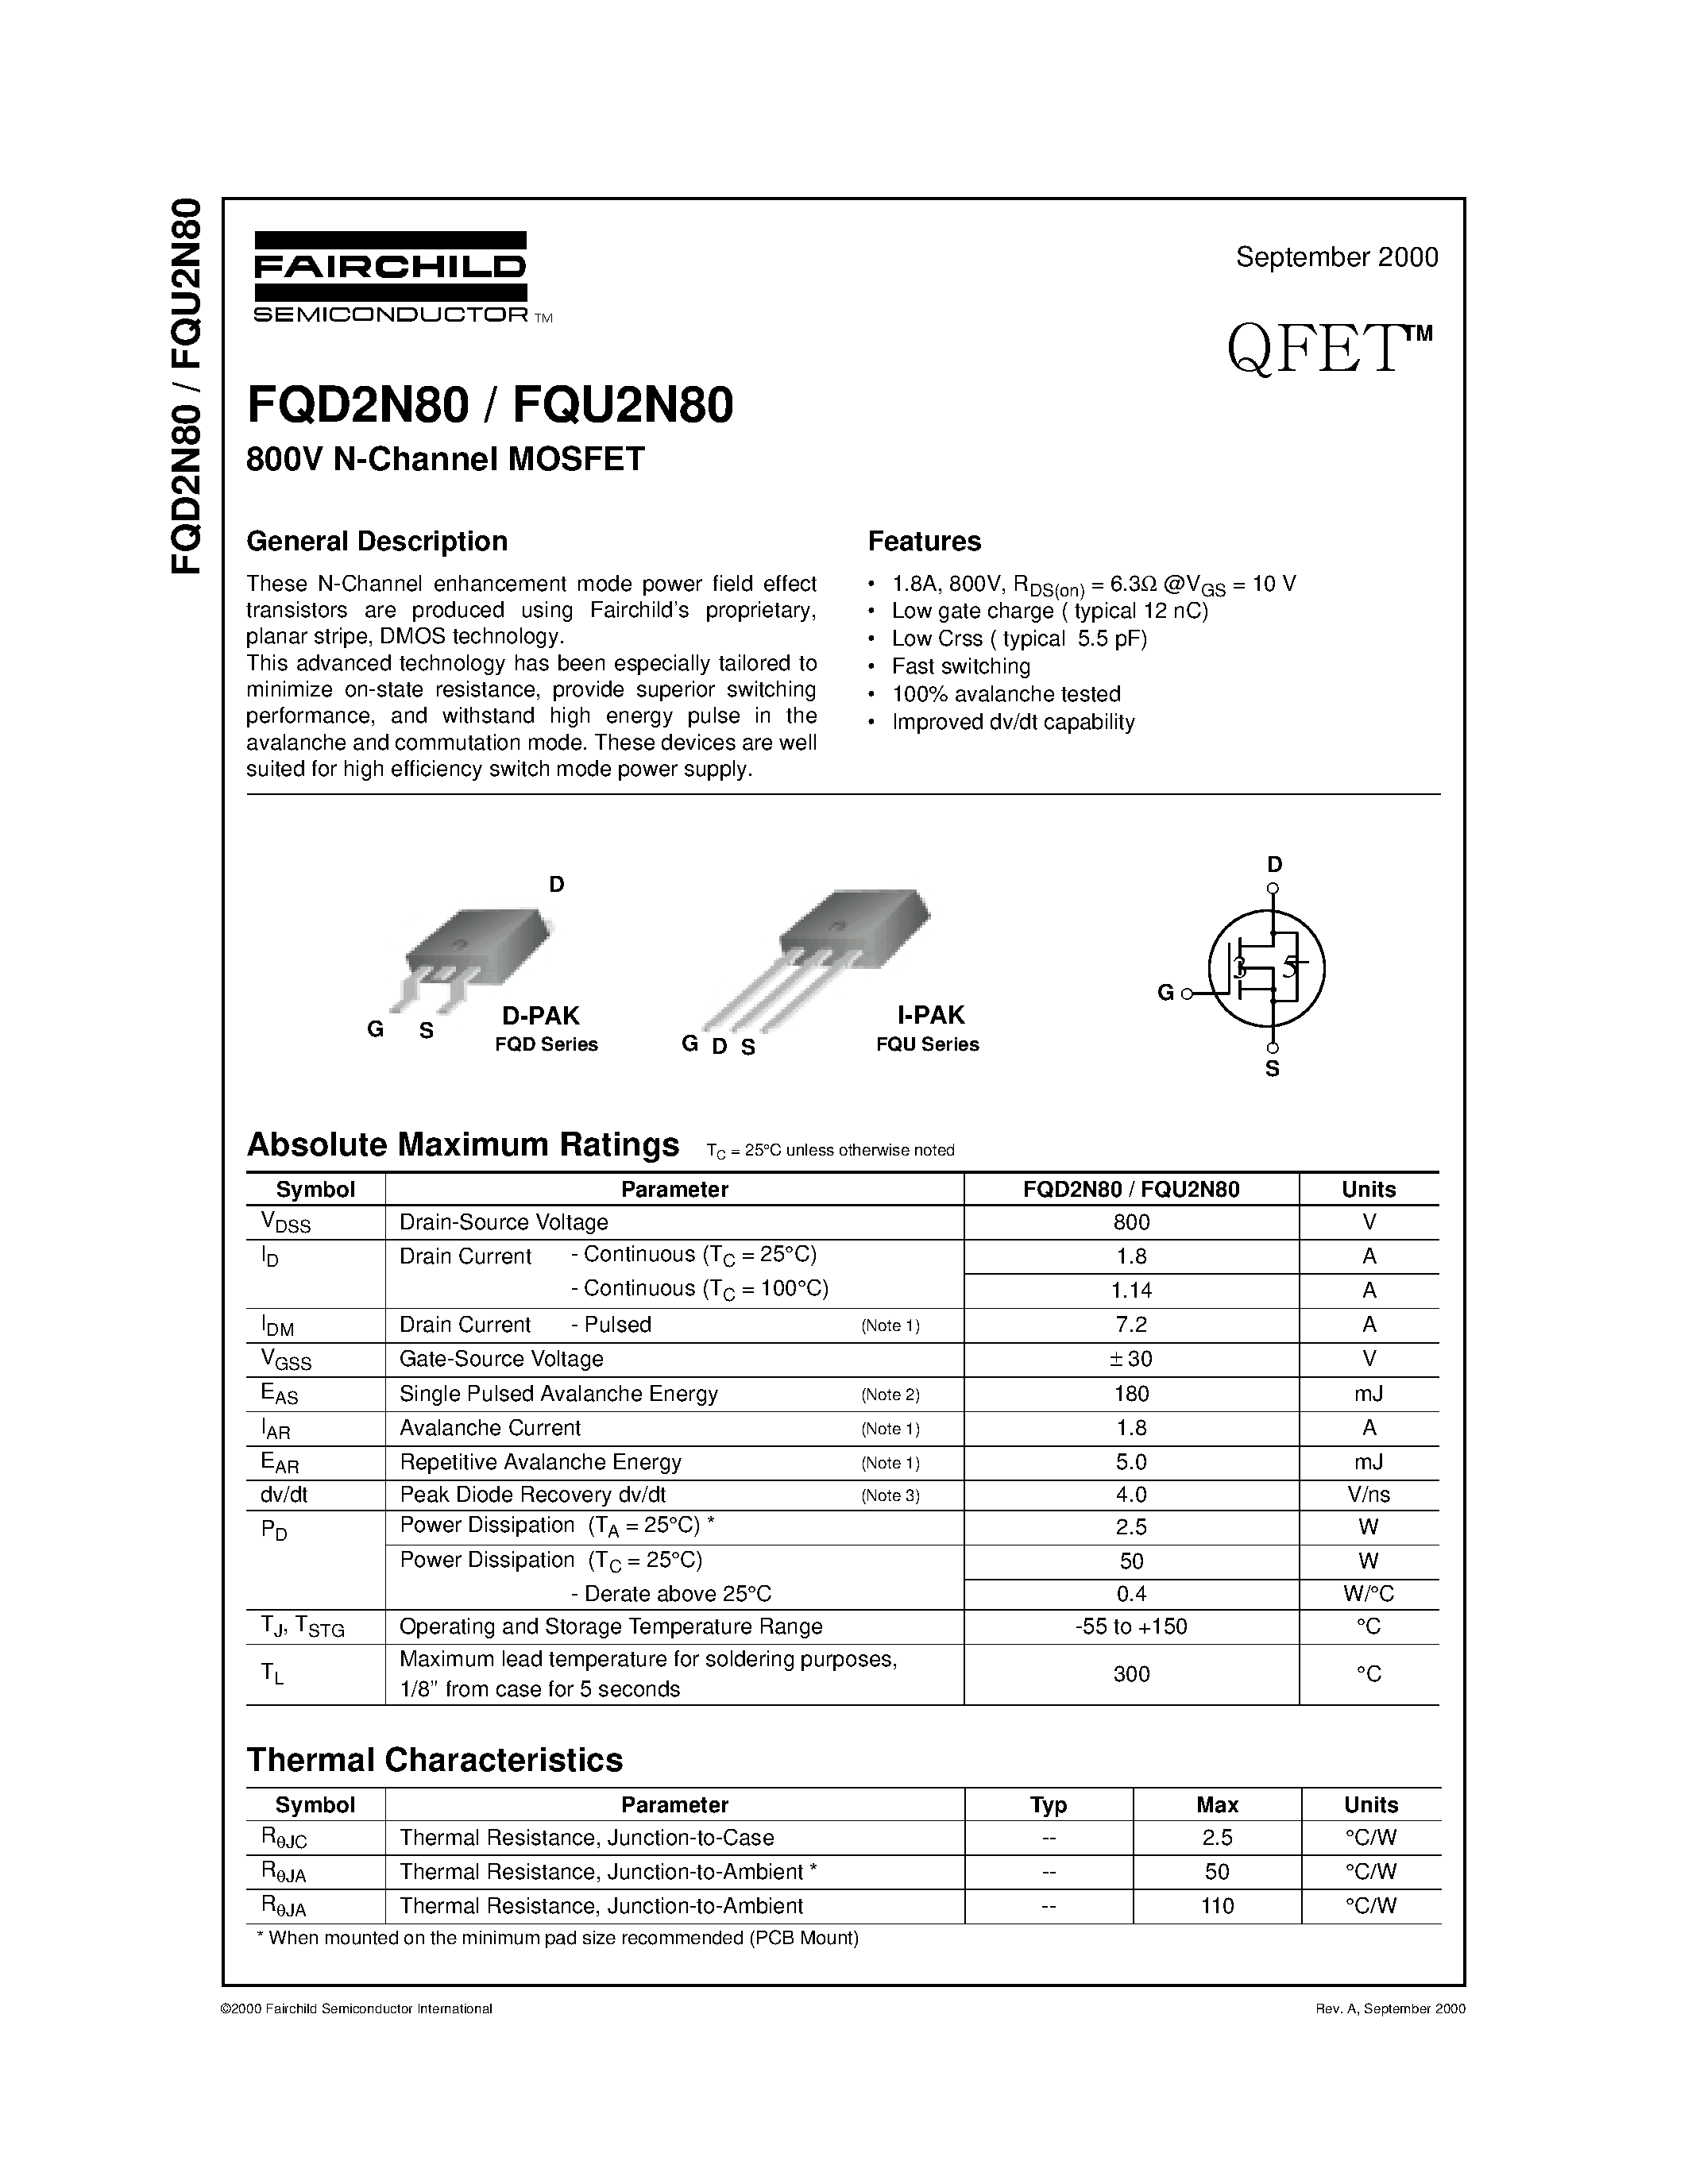 Datasheet FQD2N80 - 800V N-Channel MOSFET page 1